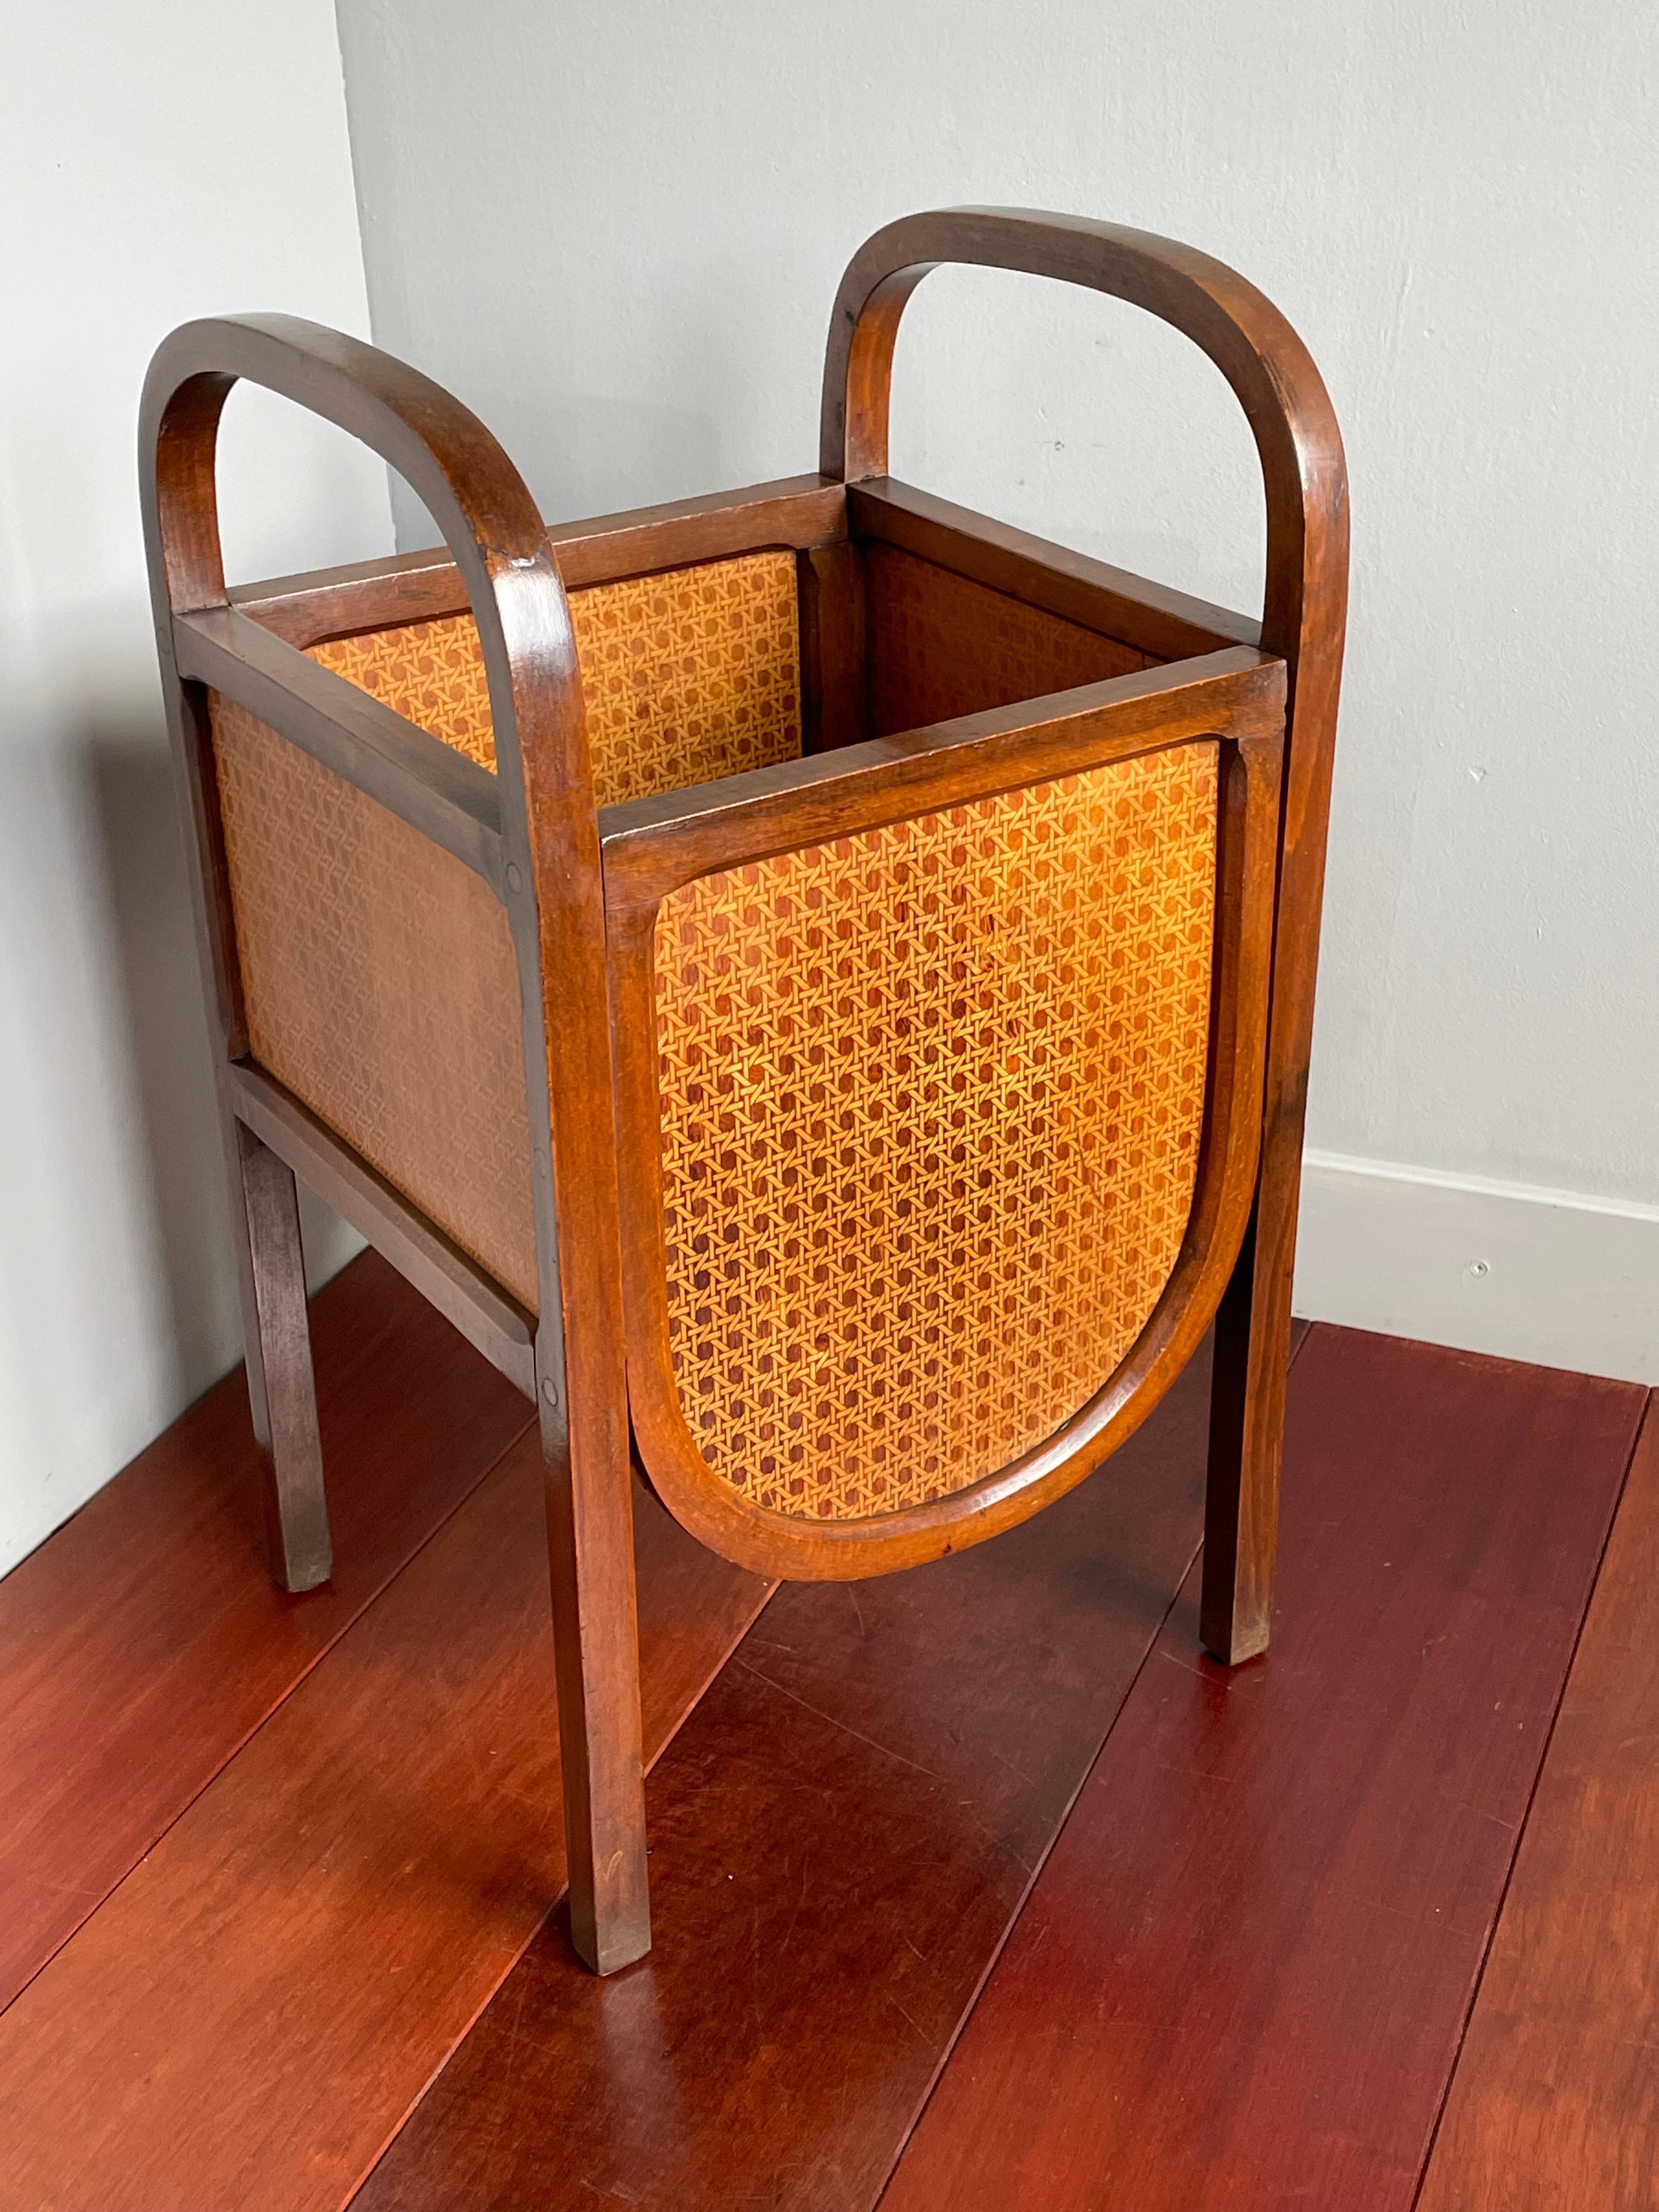 Wonderful bentwood bucket stand with unique hand-printed rattan pattern.

In the late 1800s and early 1900s many of the hand-crafted accessories that made their way to the homes of the well-to-do were of the best quality and beauty that mankind ever